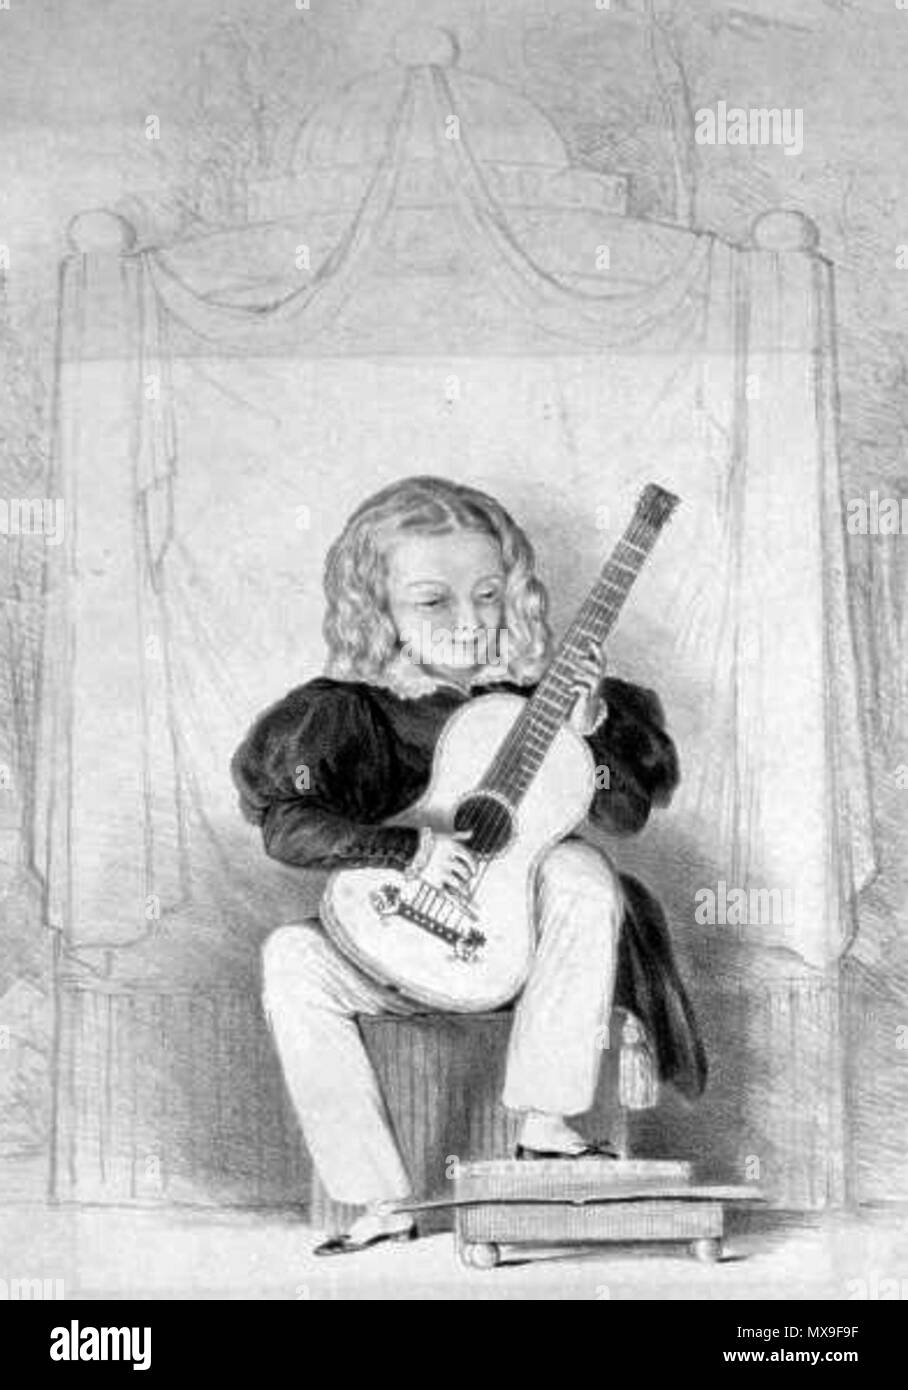 . English: Italian classical guitarist and composer Giulio Regondi (1822-1872) appearing as a child prodigy at the Royal Adelphi Theatre in London on 3 September 1831. 19th century. Unattributed 247 Giulio Regondi at the Royal Adelphi Theatre, London, 1831 Stock Photo